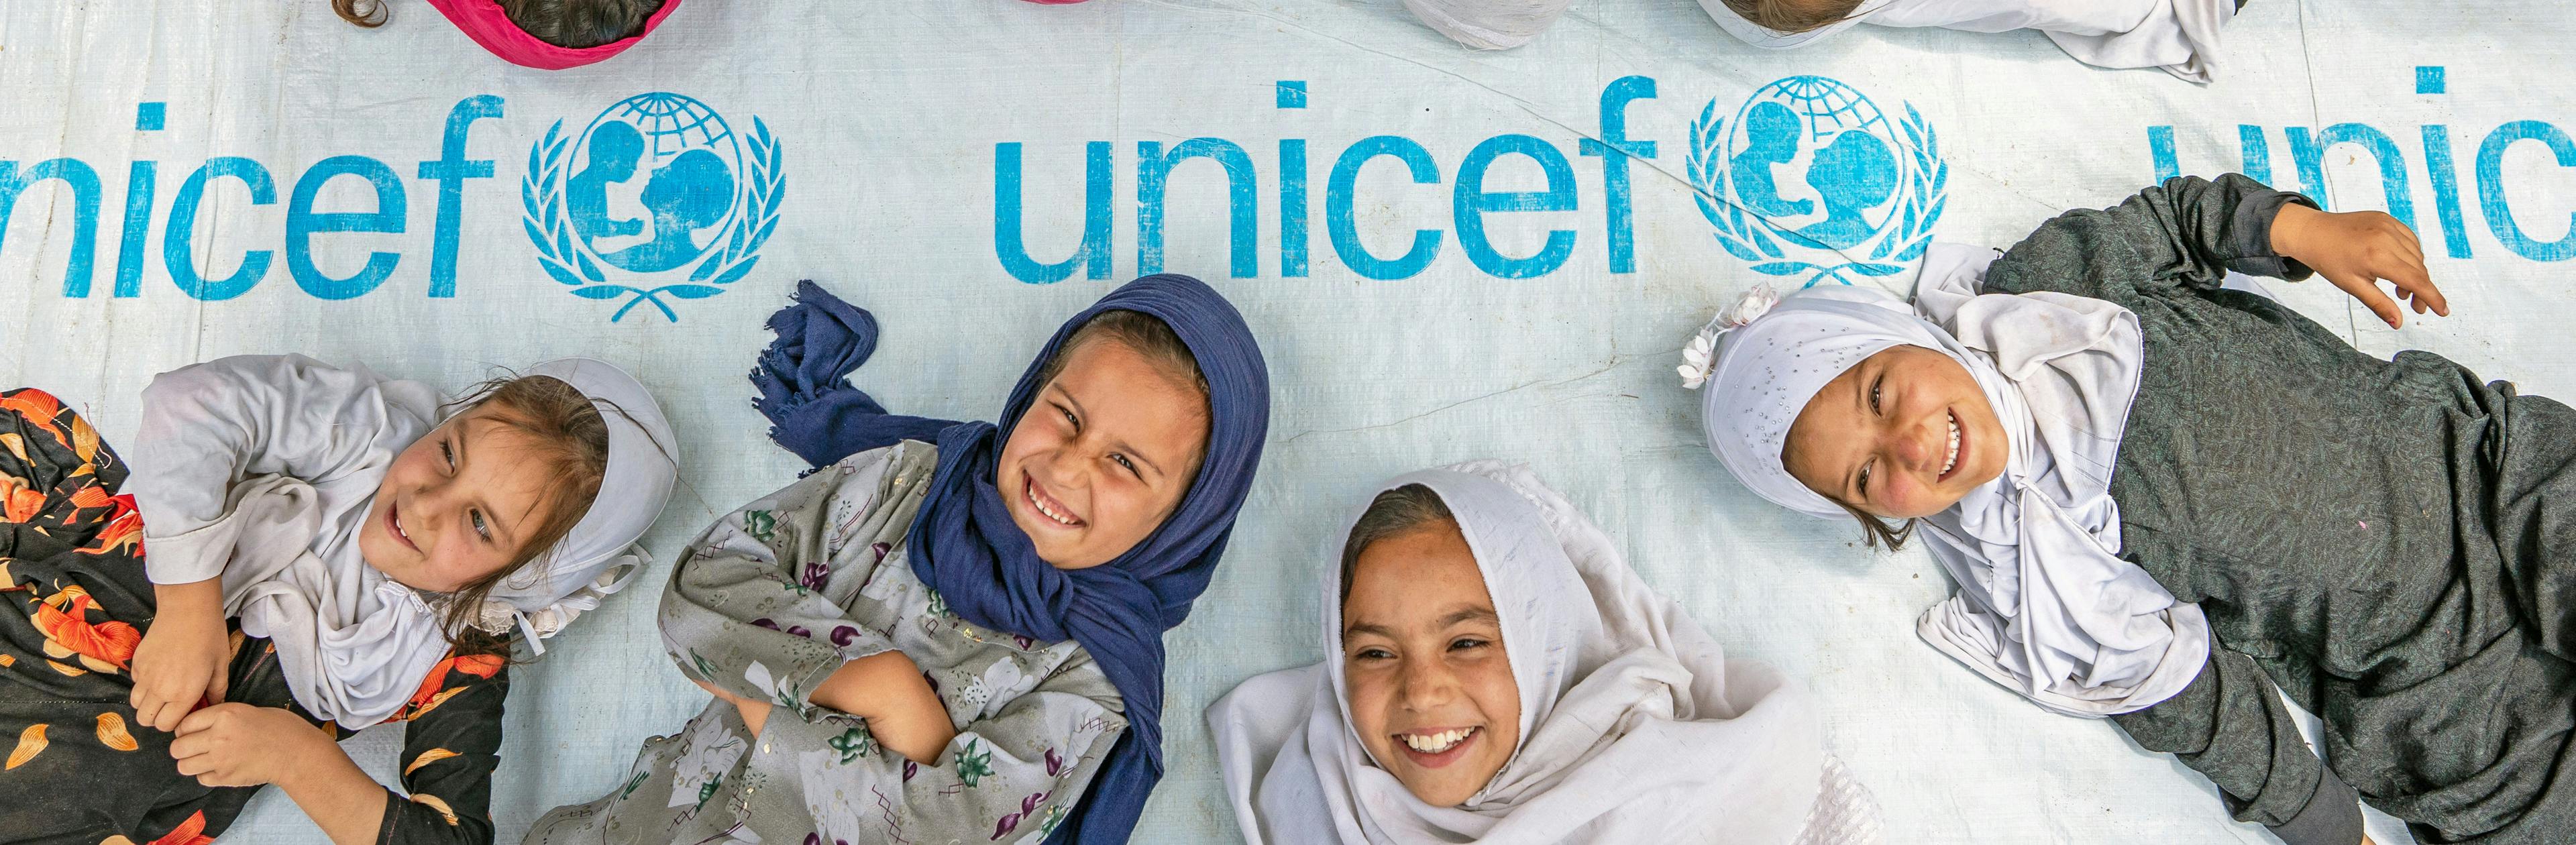 On 7th July 2022, girls pose at the entrance to a UNICEF-supported community-based education centre in Hijrat Mina in Bagrami District, Kabul Province, Afghanistan.